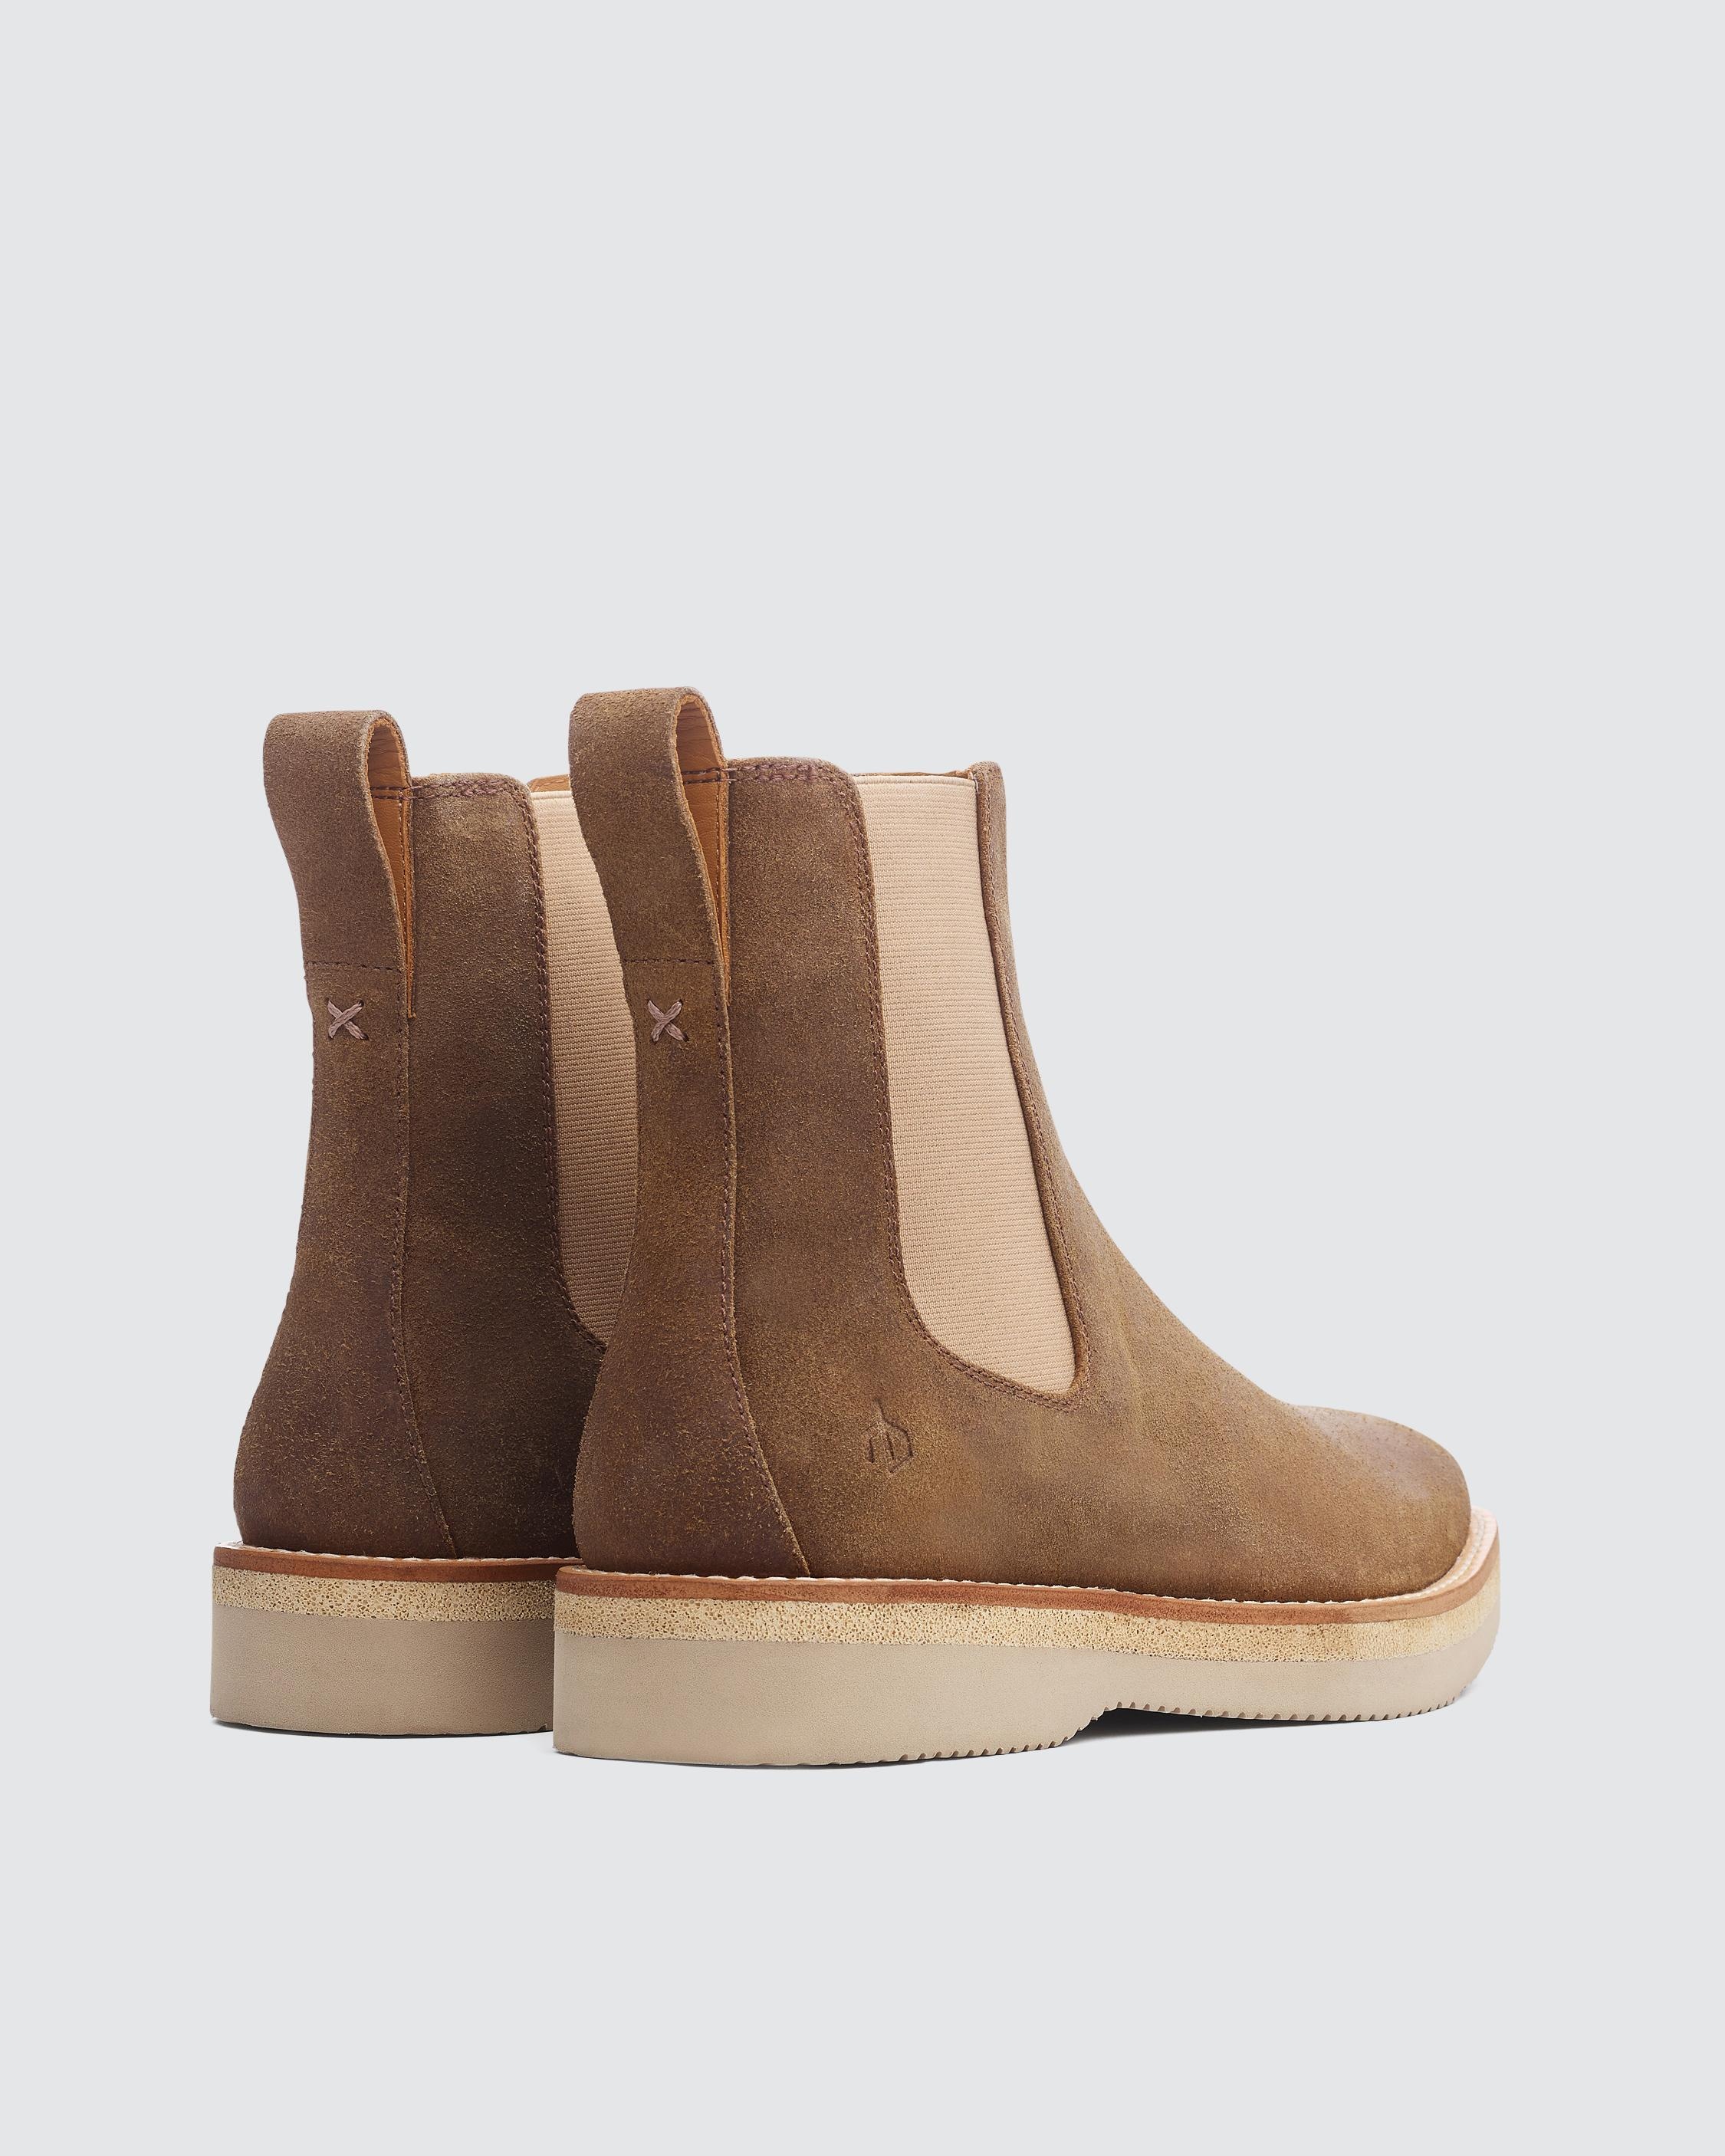 Bedford Boot - Suede
Chelsea Boot - 4